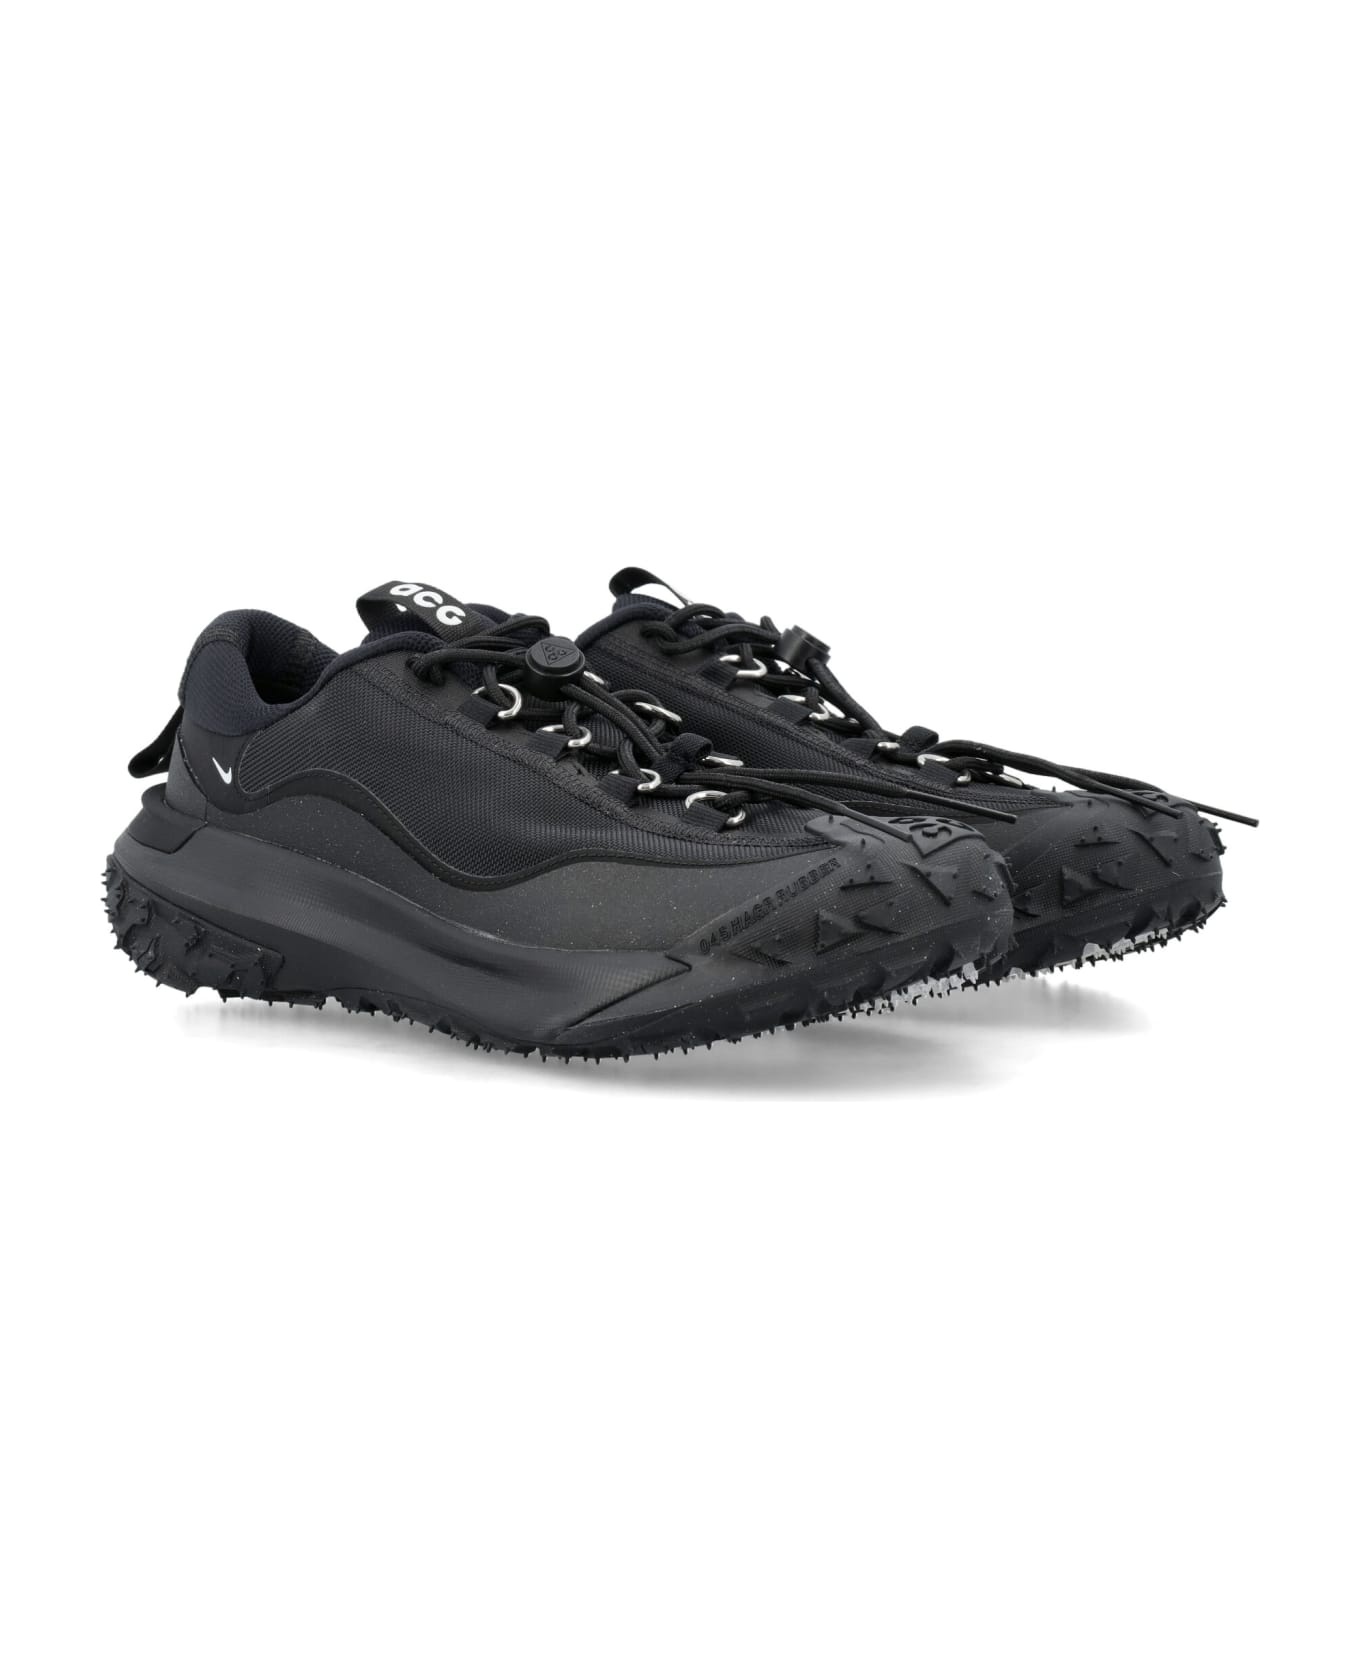 Acg Mountain Fly 2 Low - 2